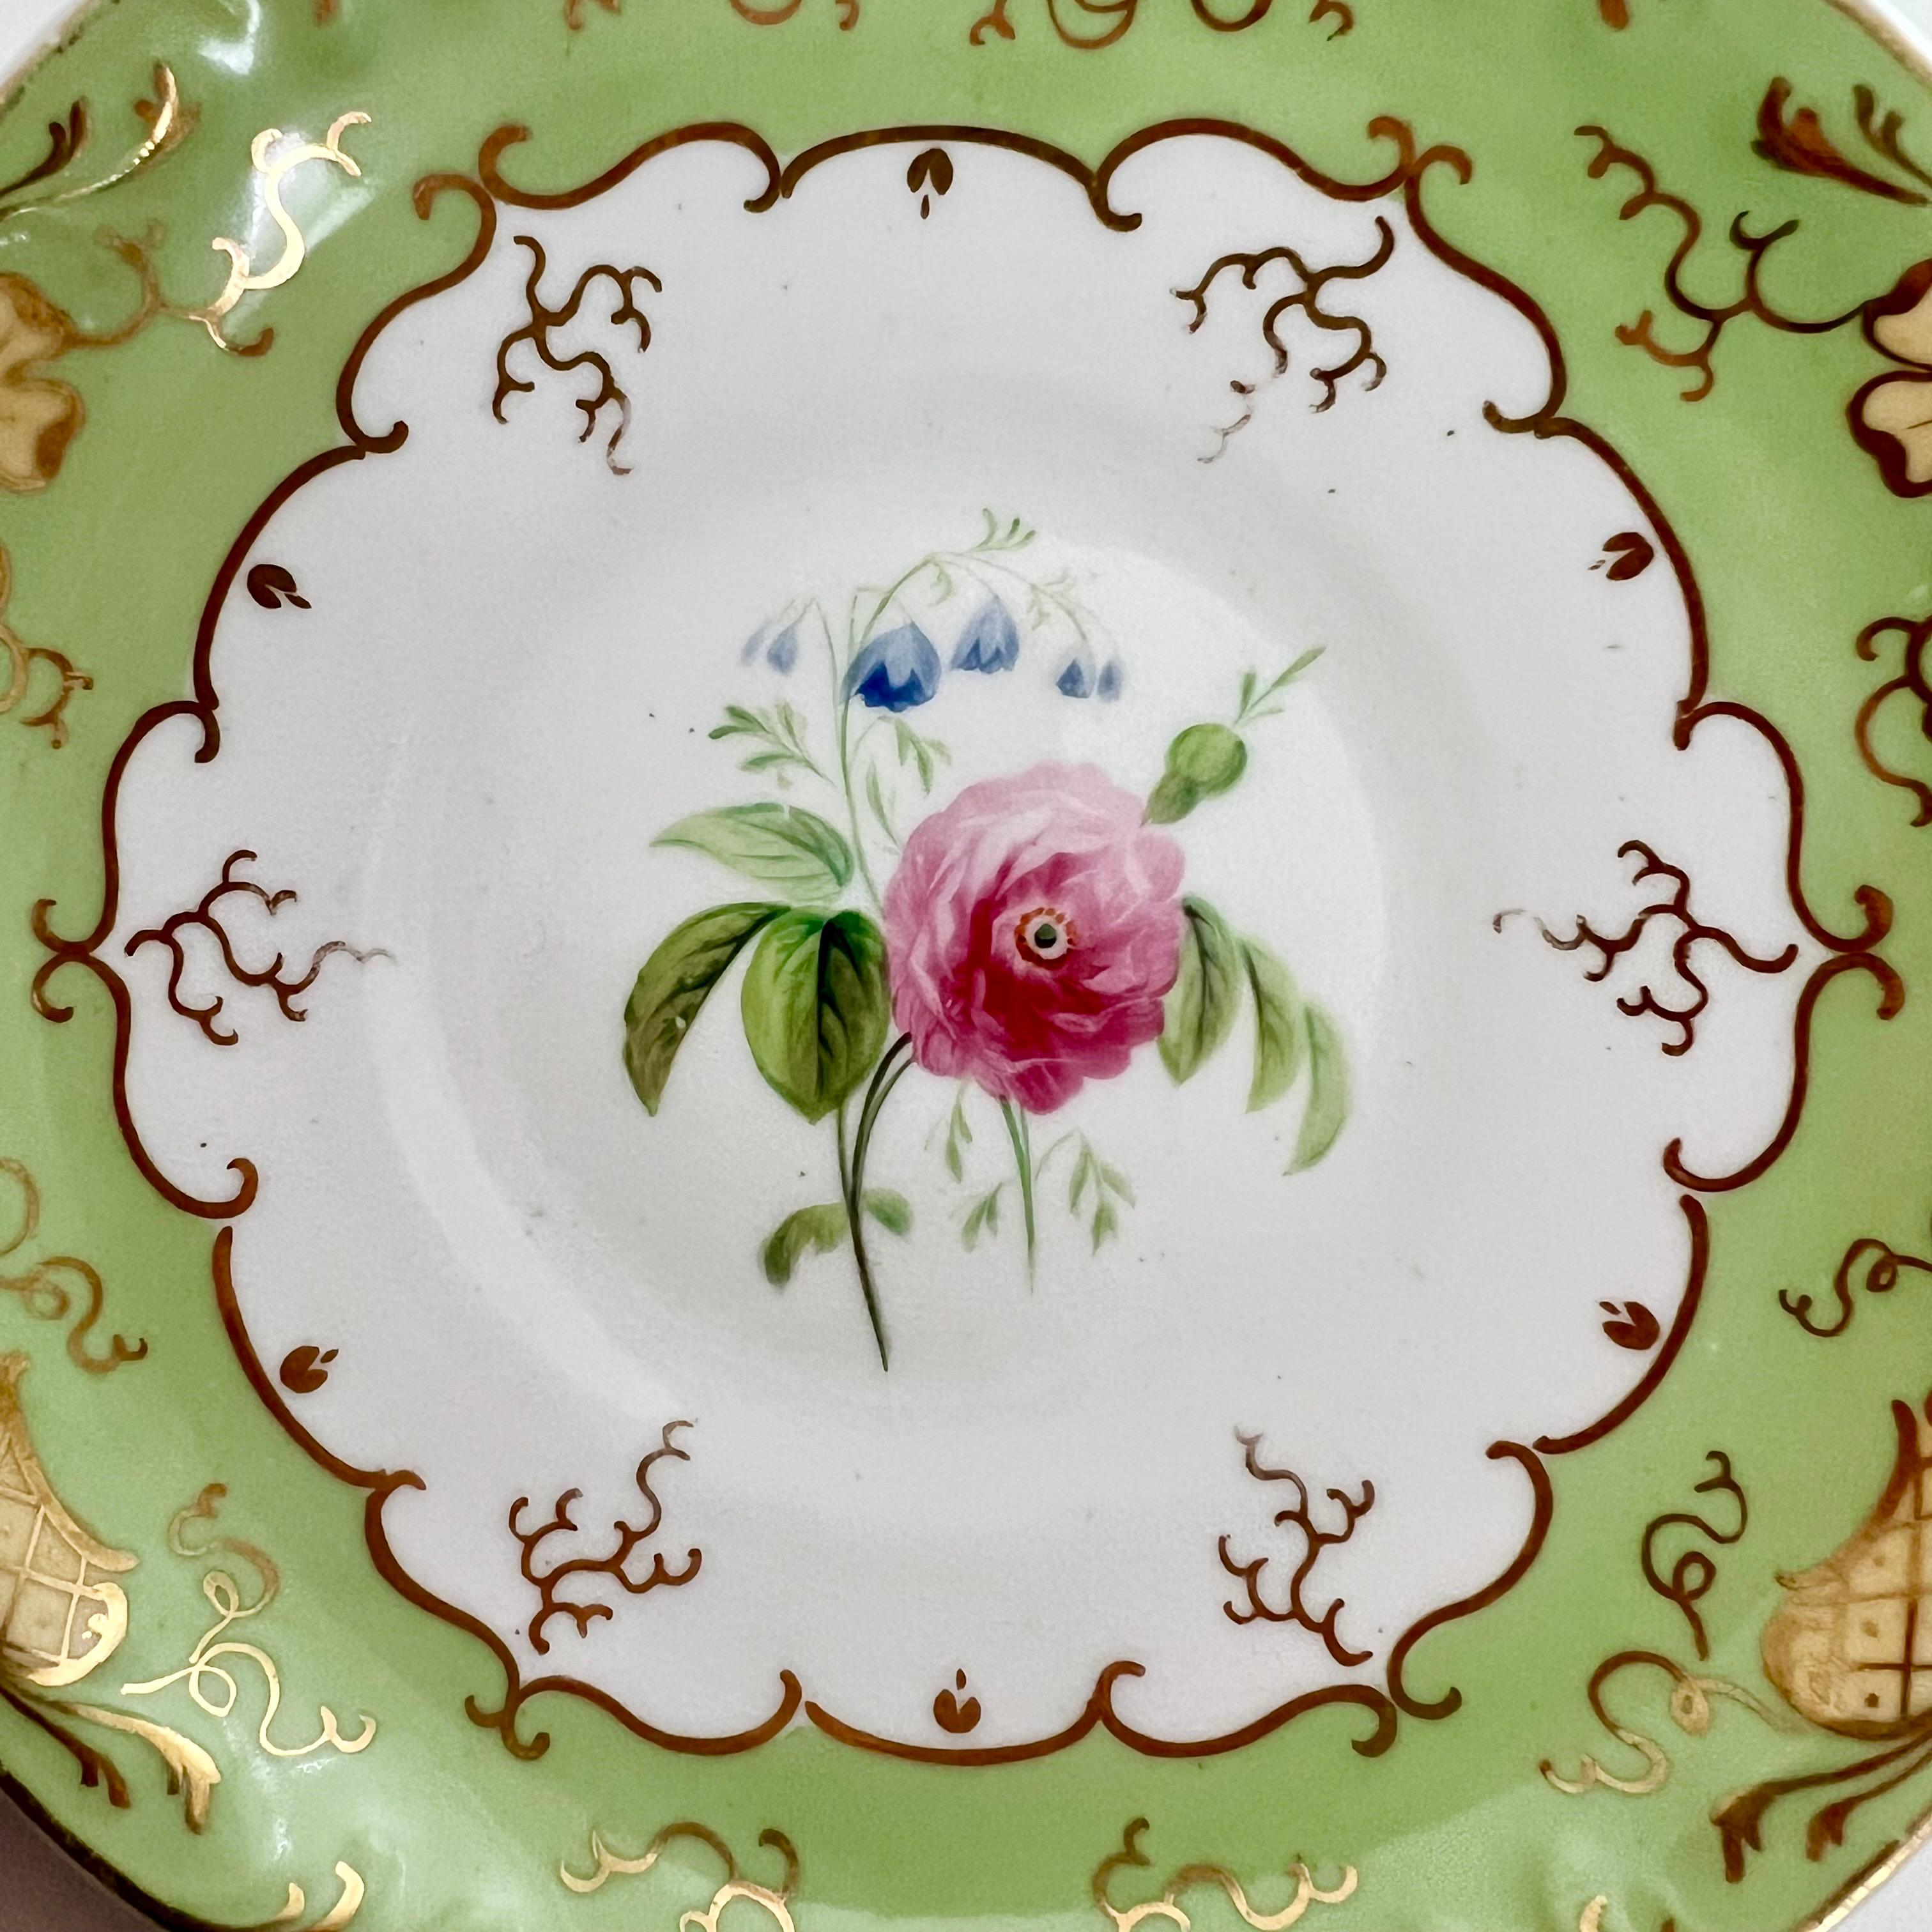 H & R Daniel Porcelain Teacup, Apple Green with Pink Roses, Rococo Revival C1840 1